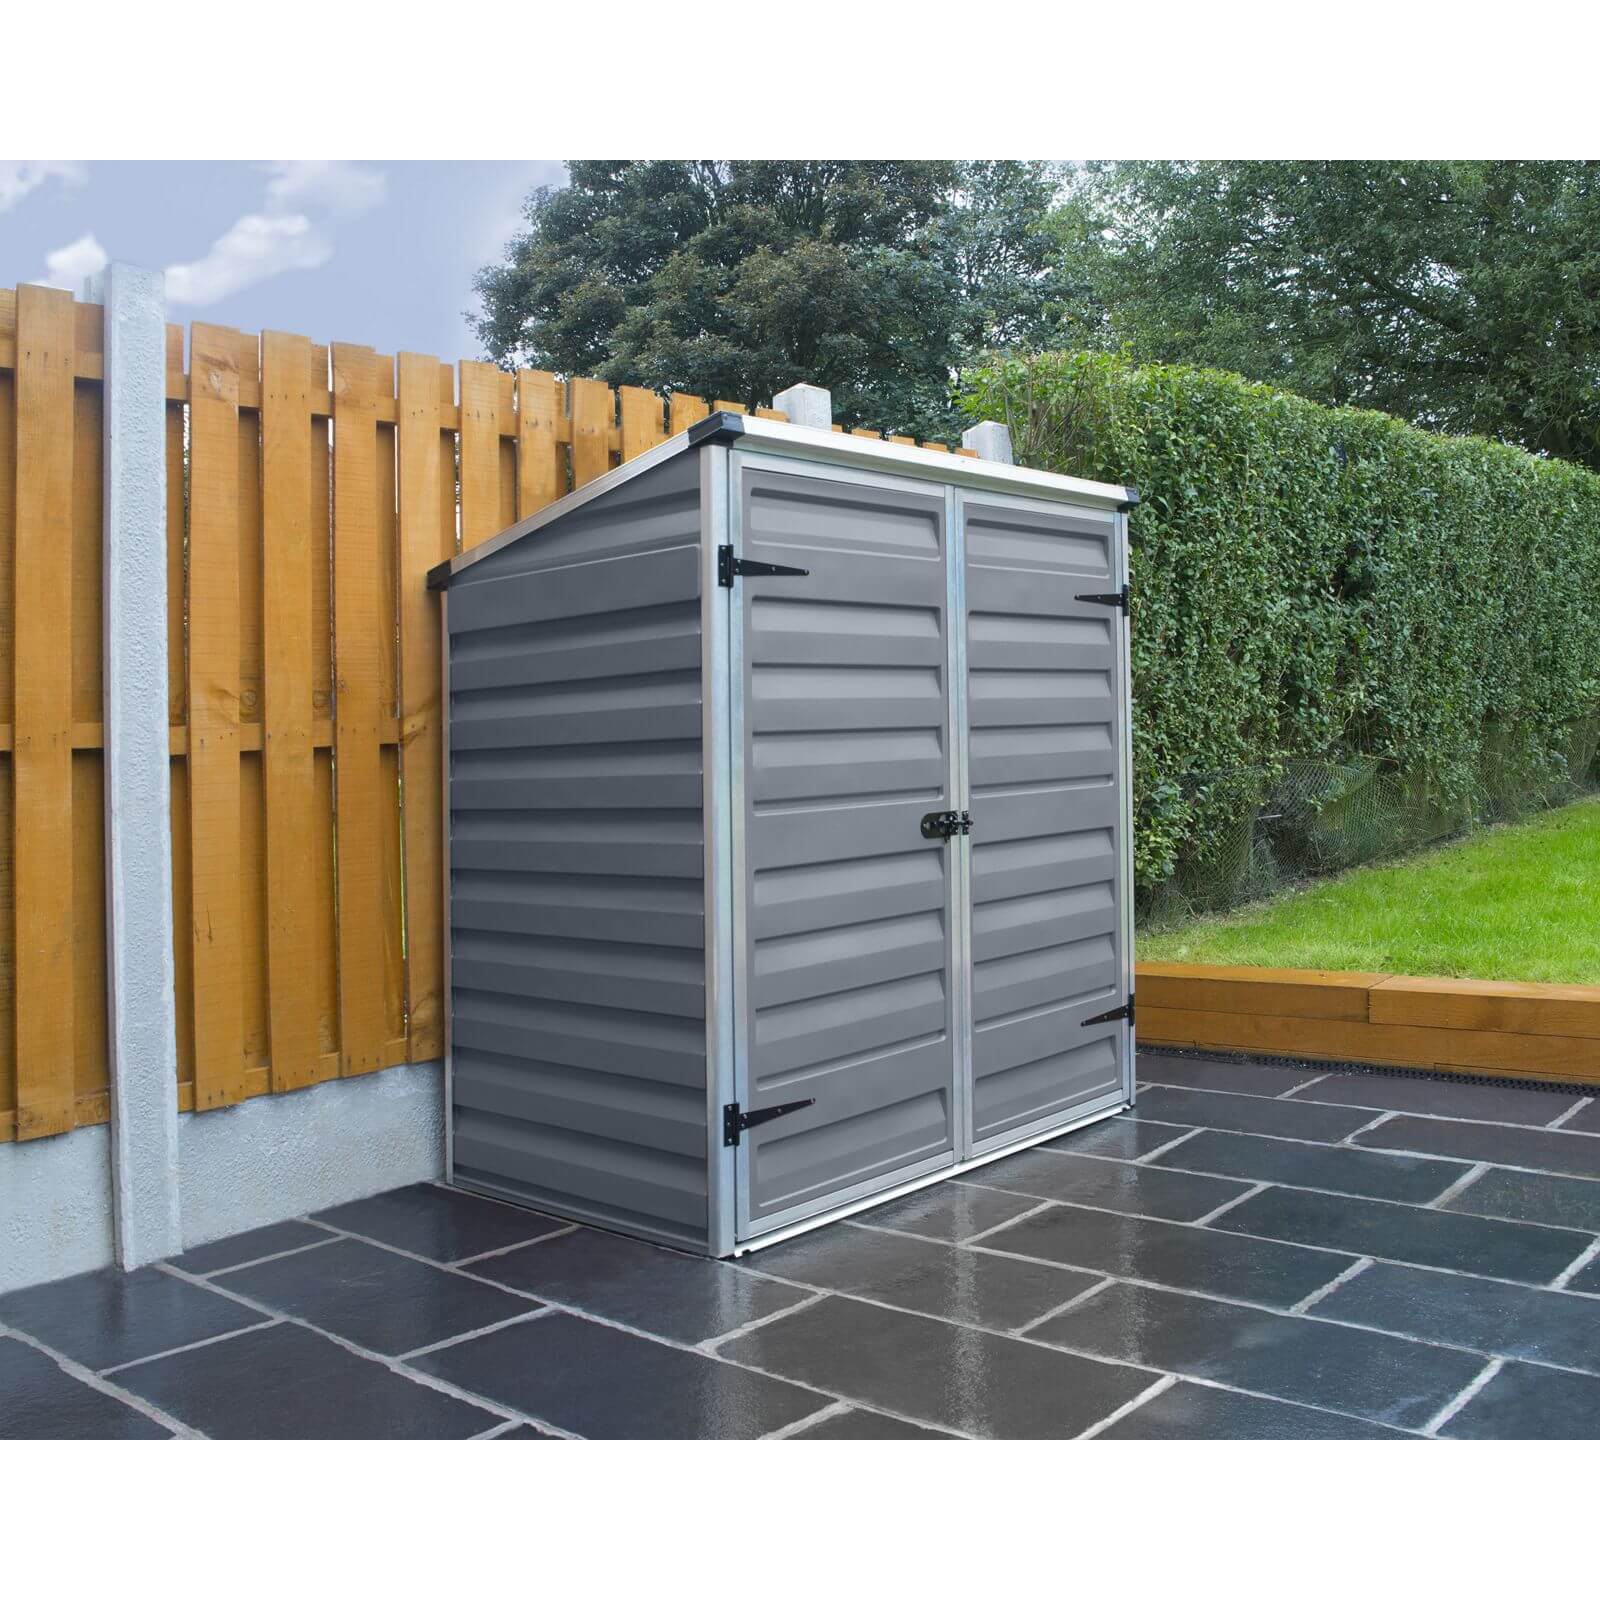 Palram - Canopia Voyager Pent Shed - Dark Grey